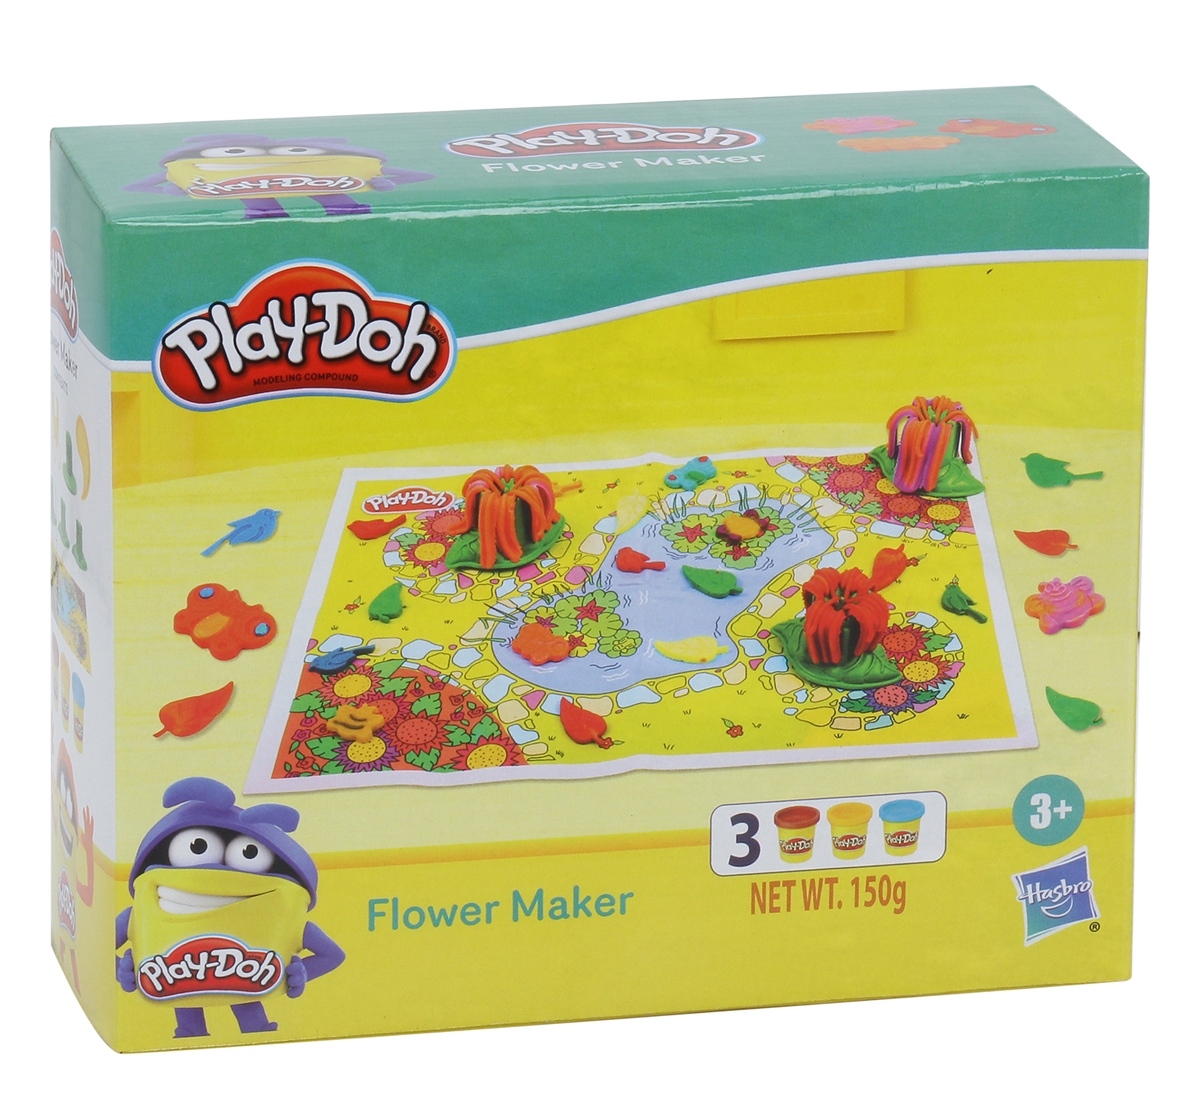 Play-Doh | Play Doh Flower Maker Toy for Kids 3Y+, Multicolour 4